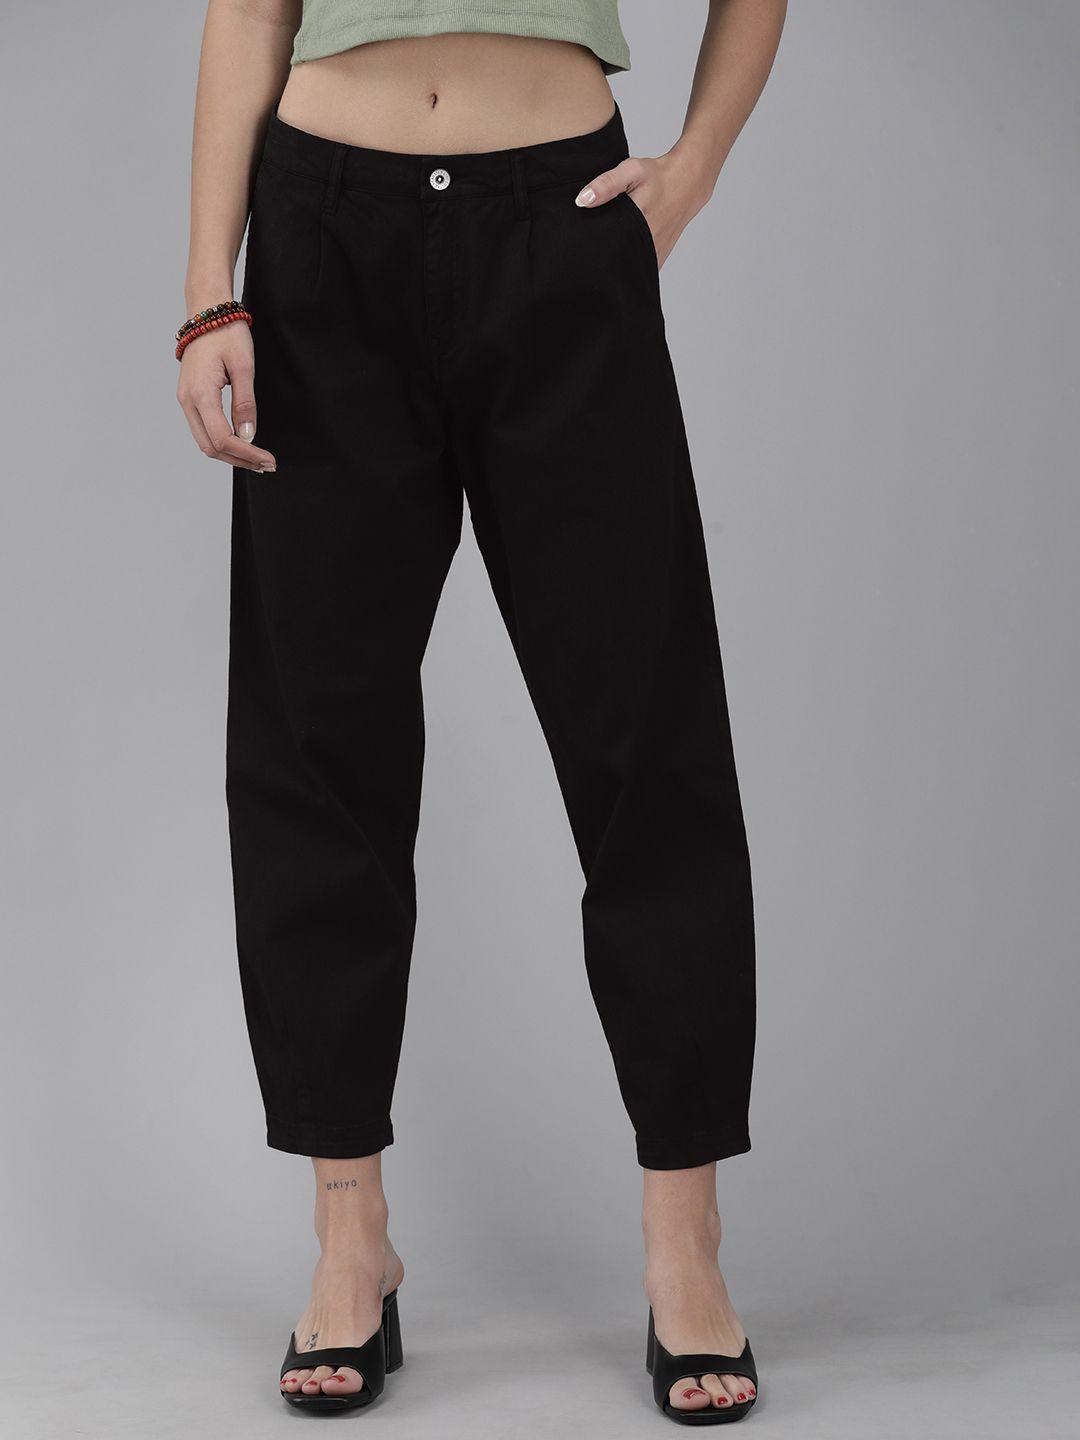 The Roadster Lifestyle Co Women Black Printed Slouchy Fit Cropped Regular Trousers